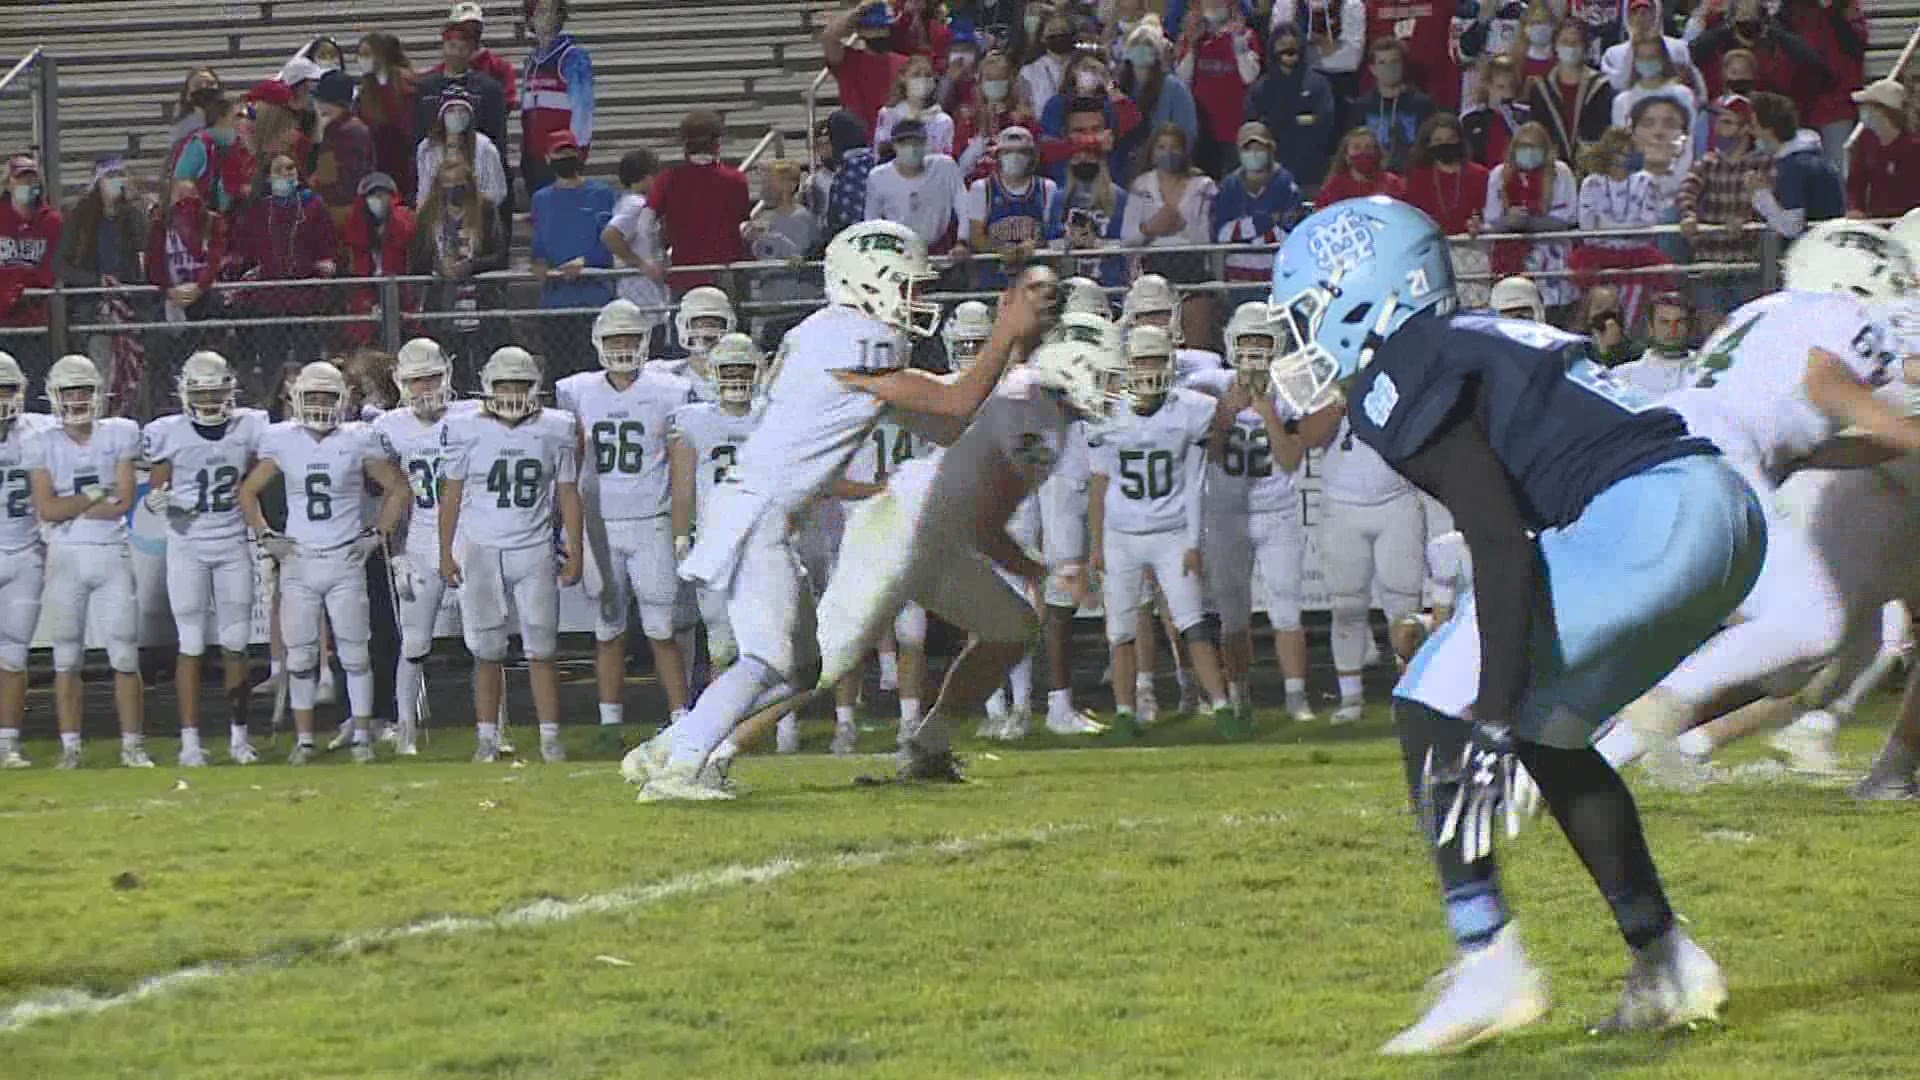 Highlights from the match-up between Forest Hills Central and Mona Shores.